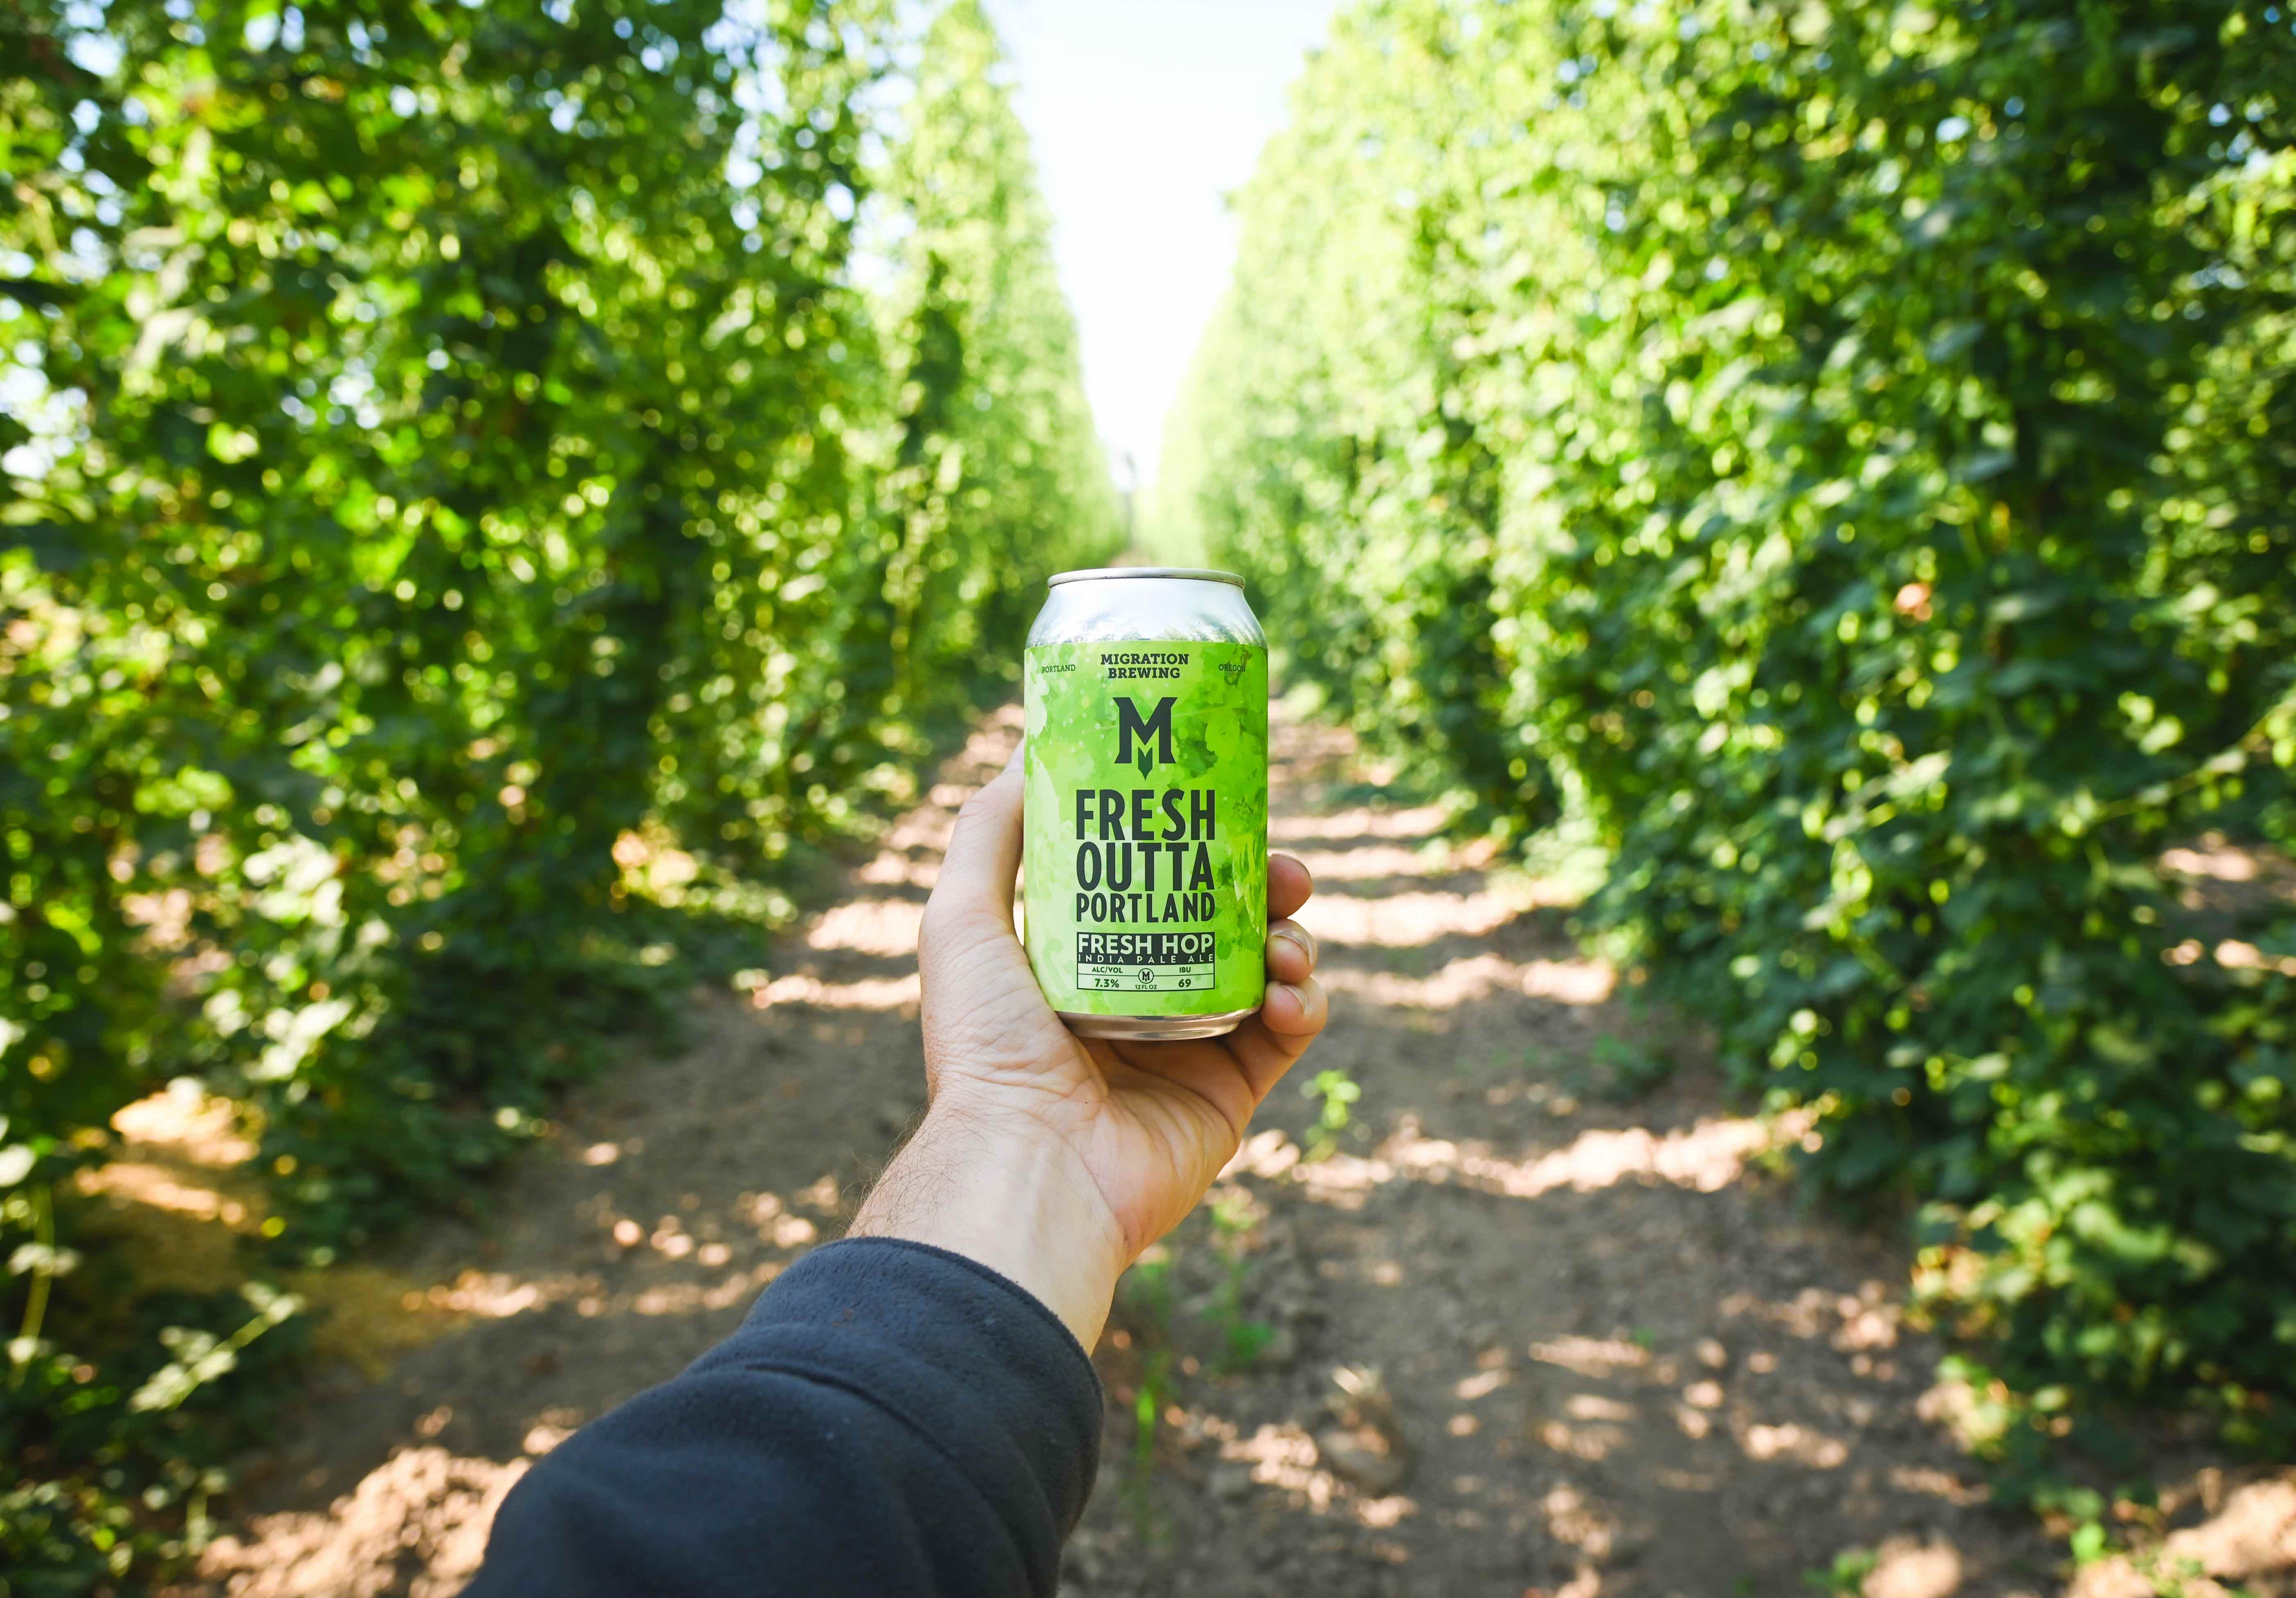 image of Fresh Outta Portland courtesy of Migration Brewing